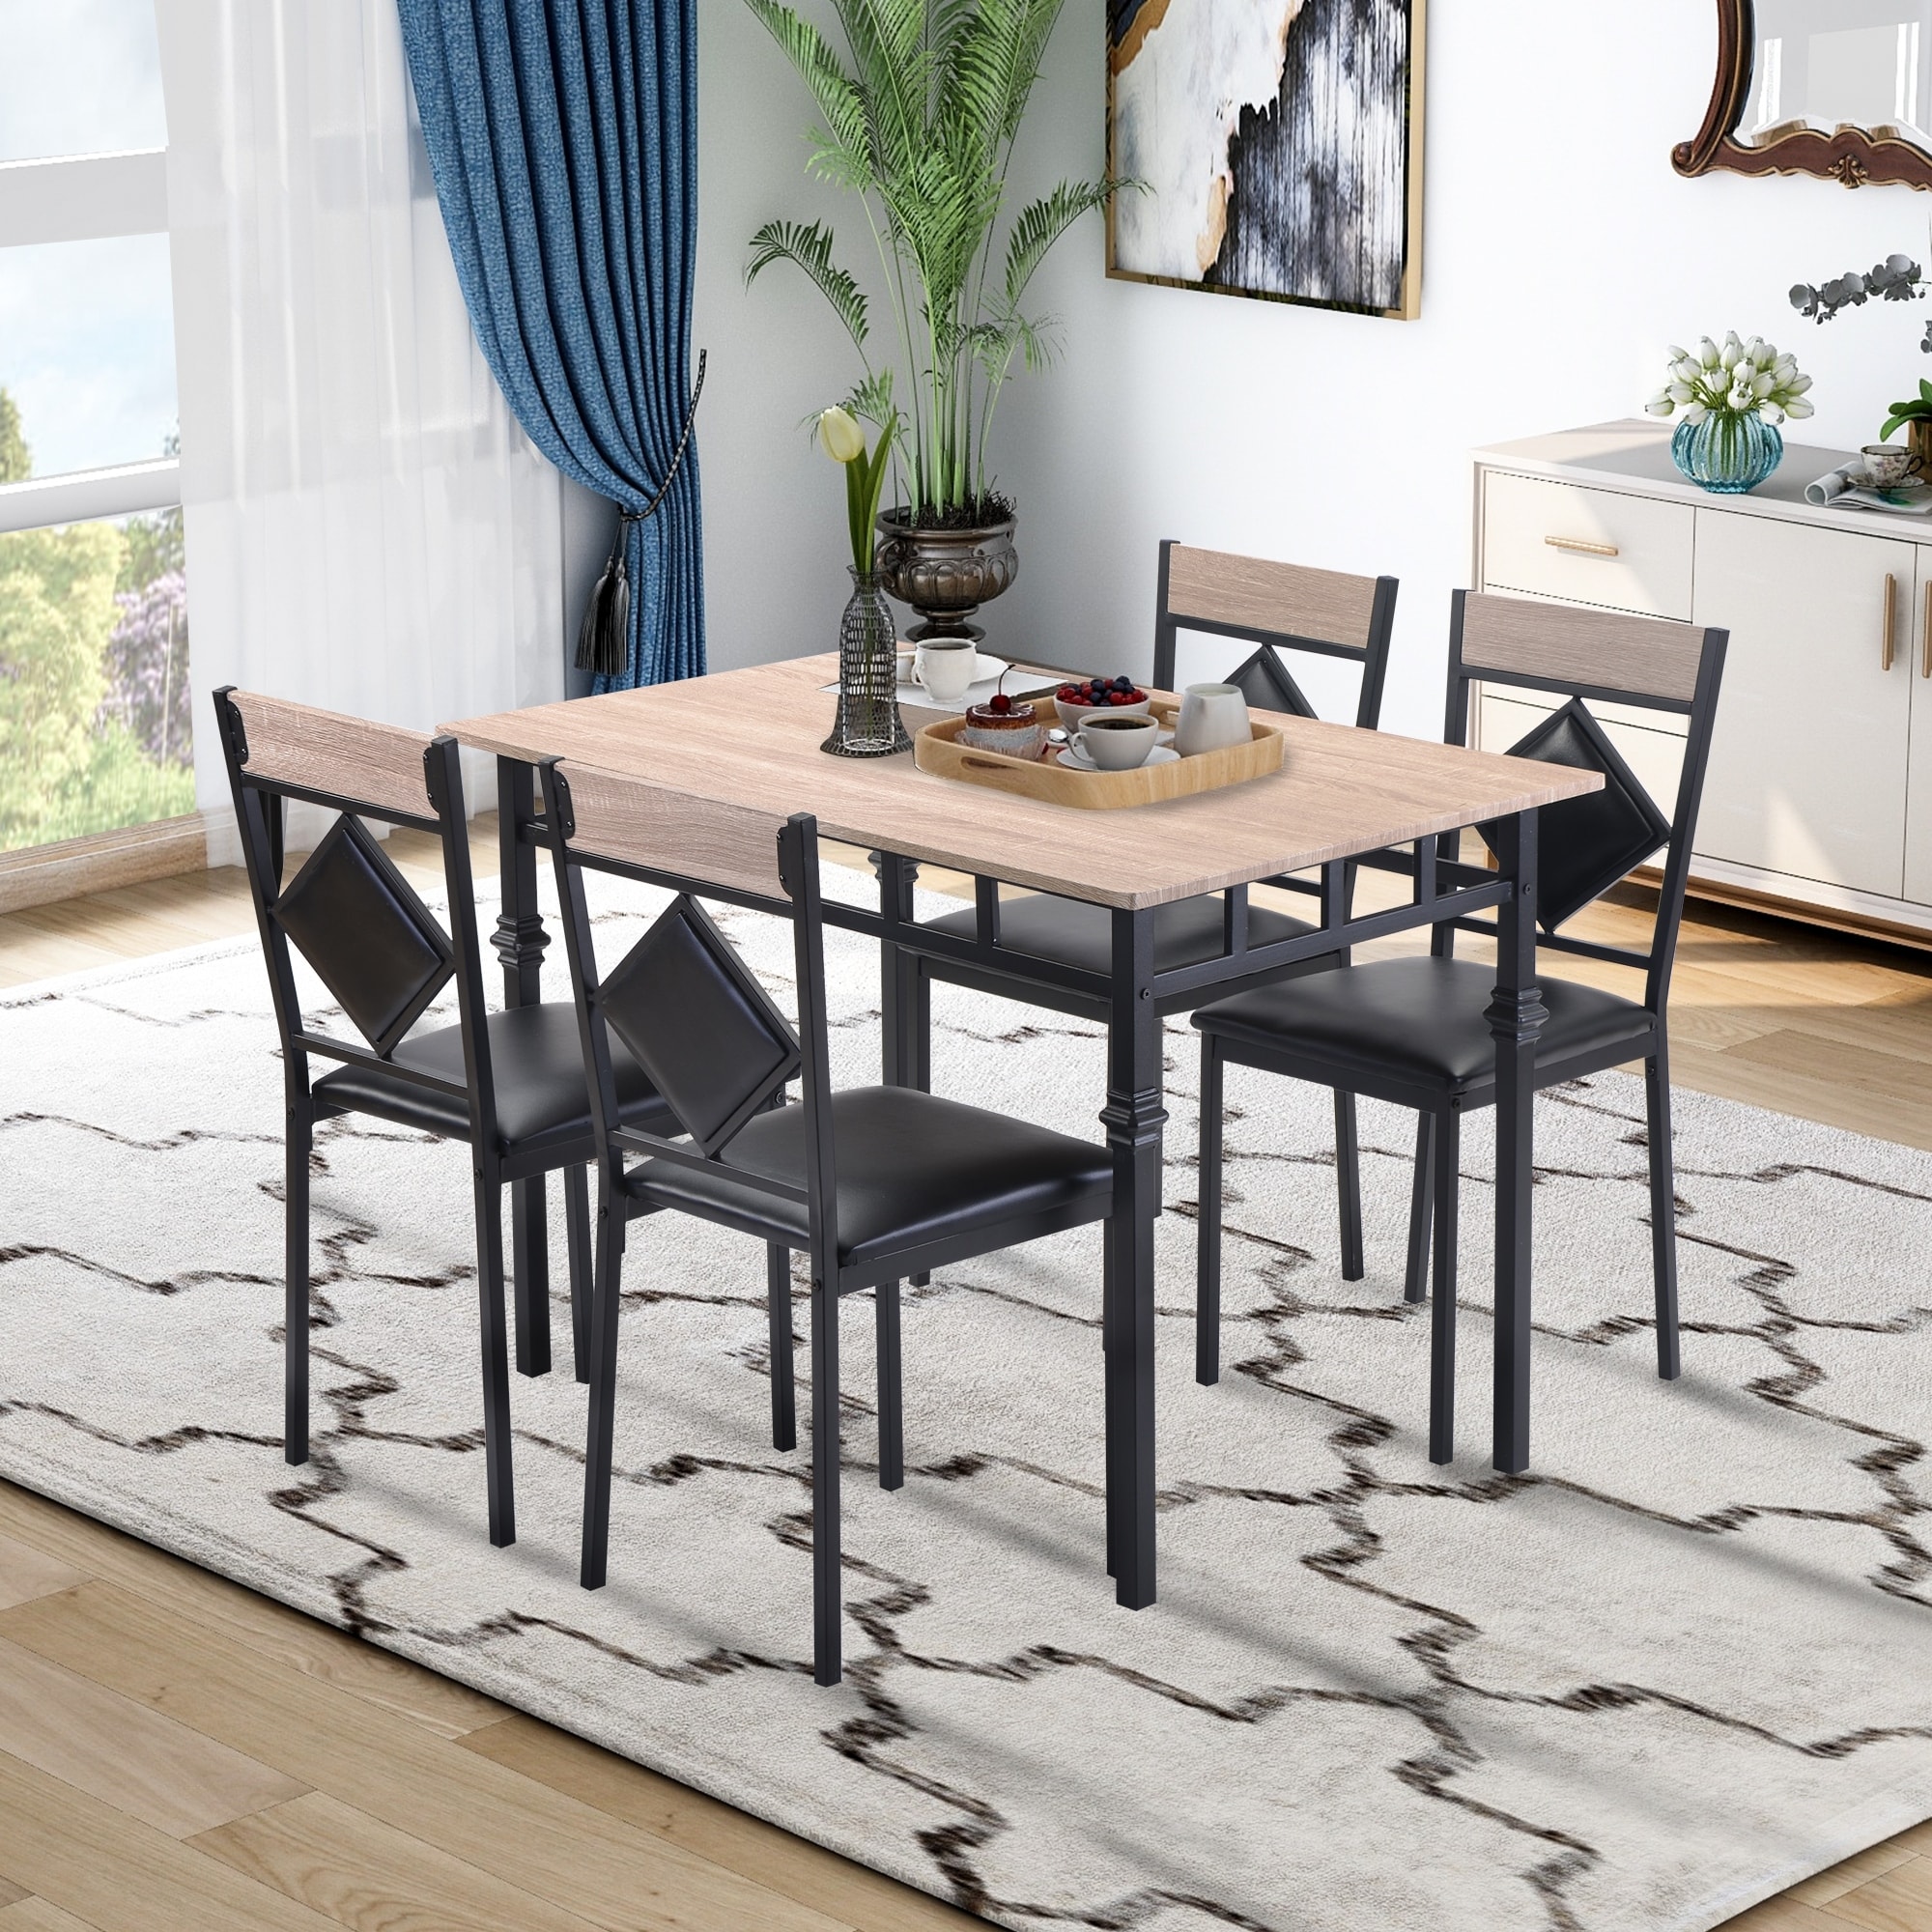 Nature Wood 5 Piece Dining Table Set With Metal Frame Overstock 32270151